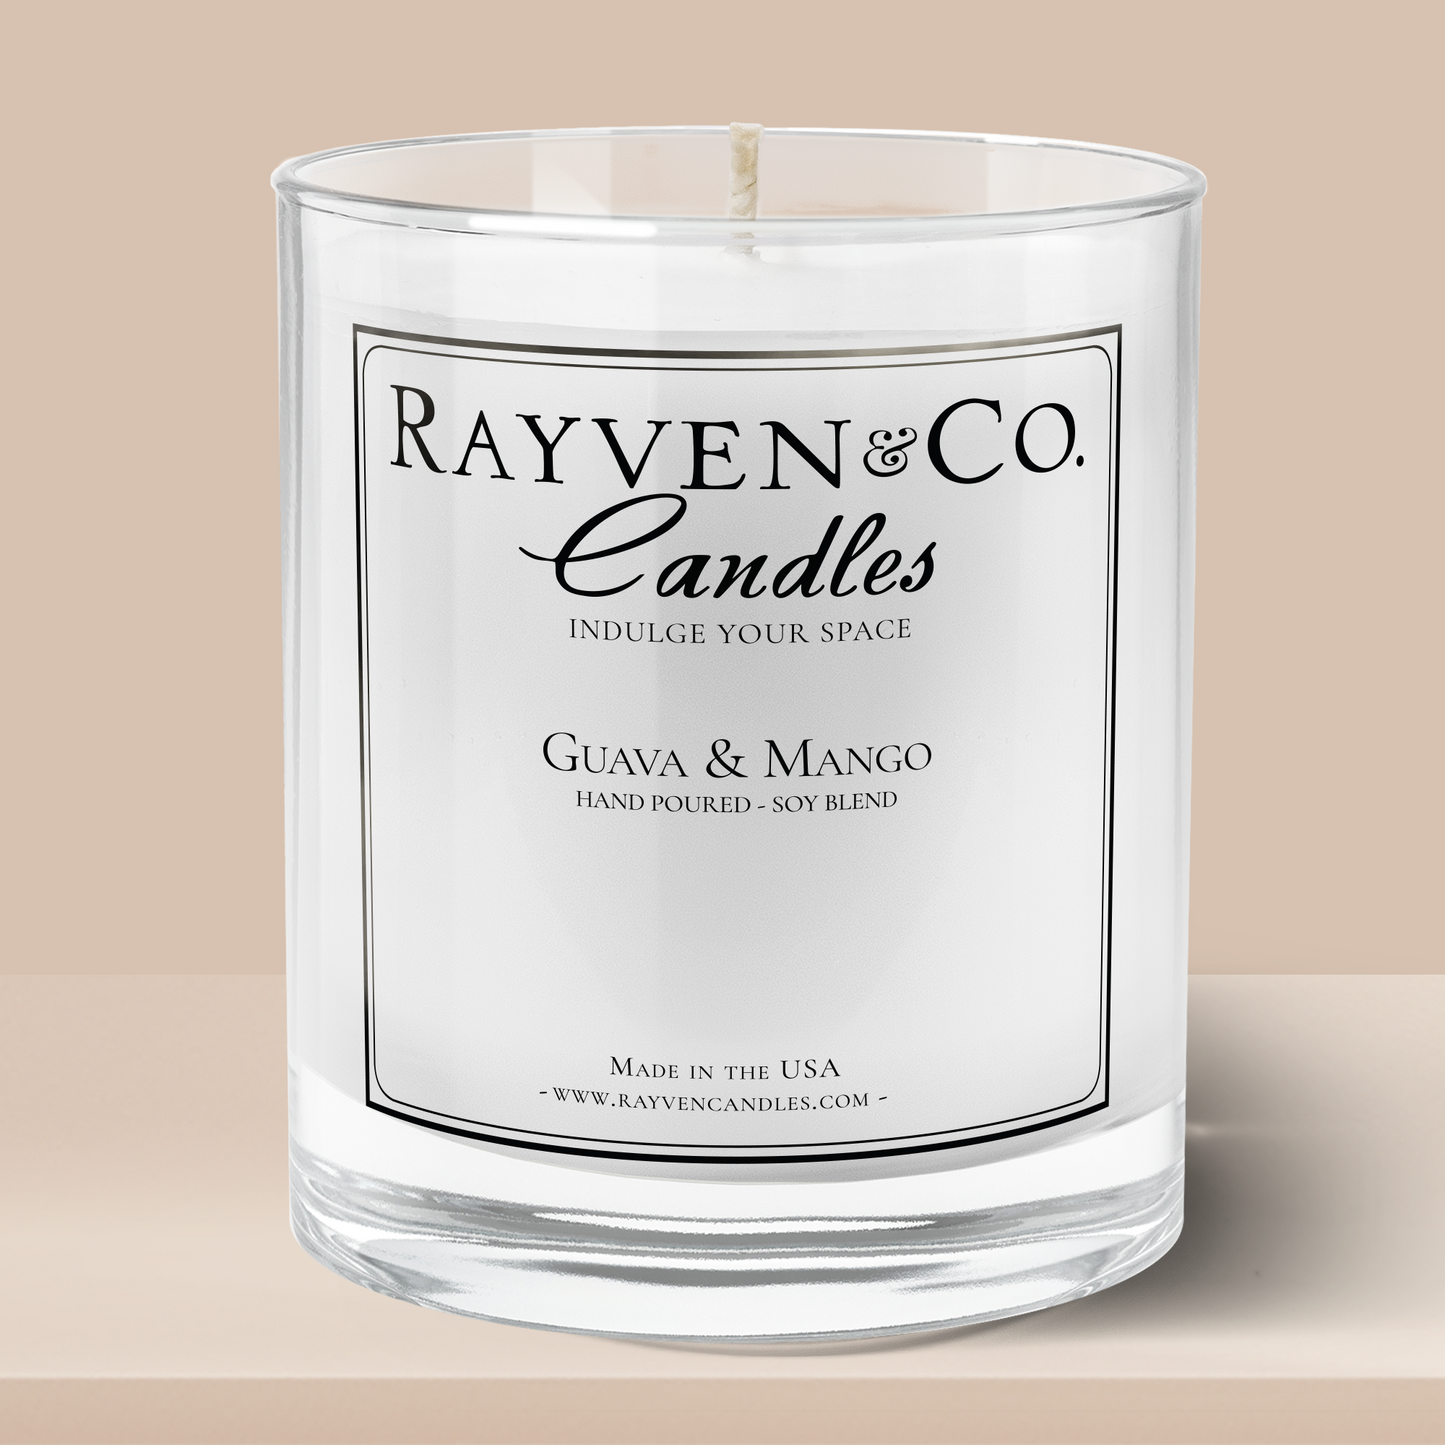 Invigorating and sweet candles